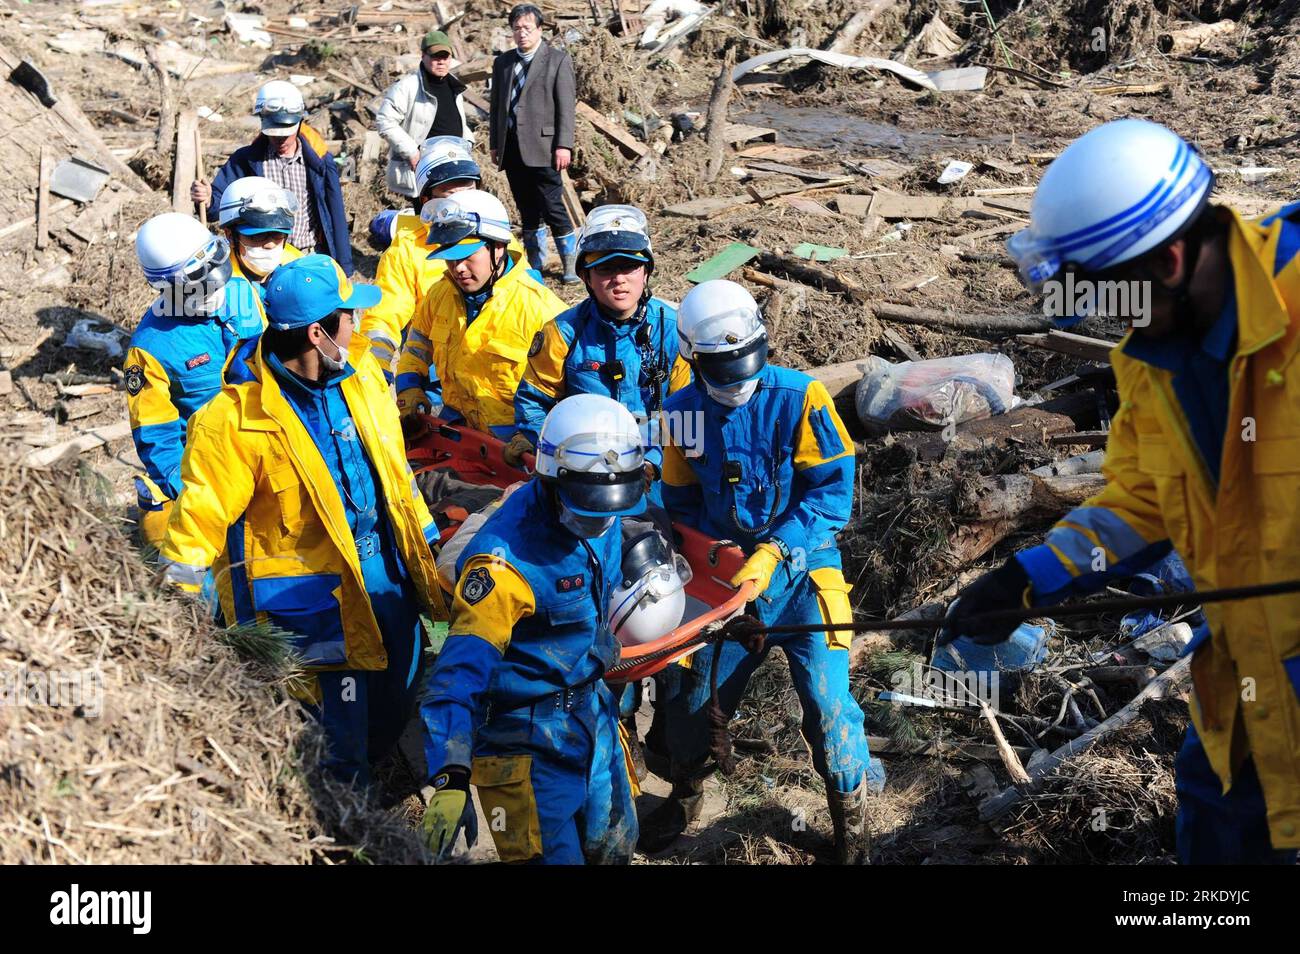 Bildnummer: 55019312  Datum: 13.03.2011  Copyright: imago/Xinhua SENDAI, March 13, 2011 (Xinhua) -- Rescuers save a survivor from the deribs in Sanbontsuka of Wakabayashi in Sendai City, Miyagi Prefecture, Japan, March 13, 2011. The area lost contact with the outside world after Friday s quake. Friday s catastrophic earthquake in Japan and the following devastating tsunami have ravaged the country, while massive rescue and recovery efforts have been quickly launched to save lives and minimize losses. (Xinhua/Ji Chunpeng)(yc) JAPAN-QUAKE PUBLICATIONxNOTxINxCHN Gesellschaft Naturkatastrophe Erdb Stock Photo